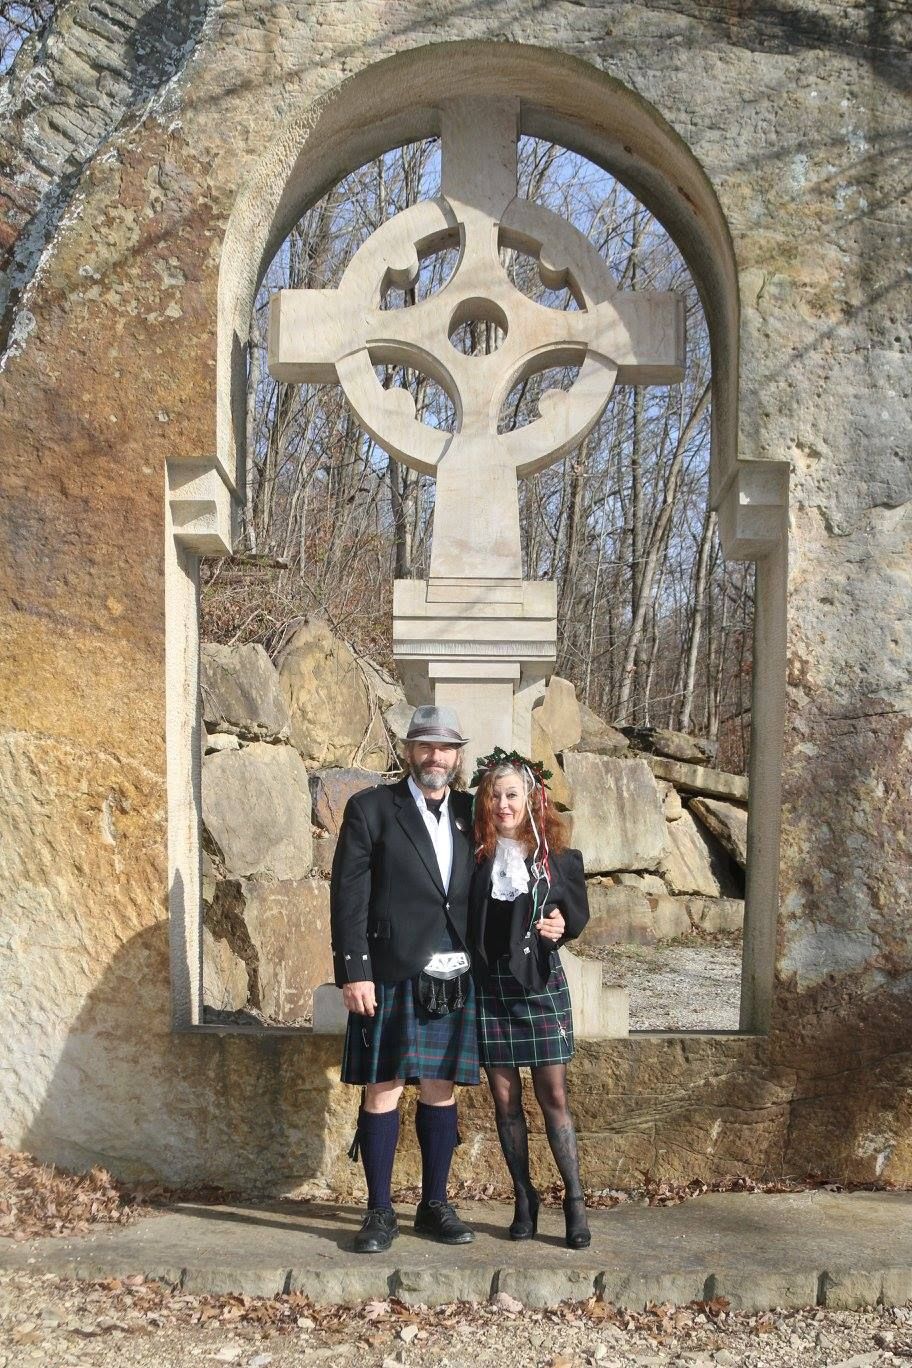 World's Largest Celtic Cross Carved From Single Rock: world record in Cannelton, Indiana